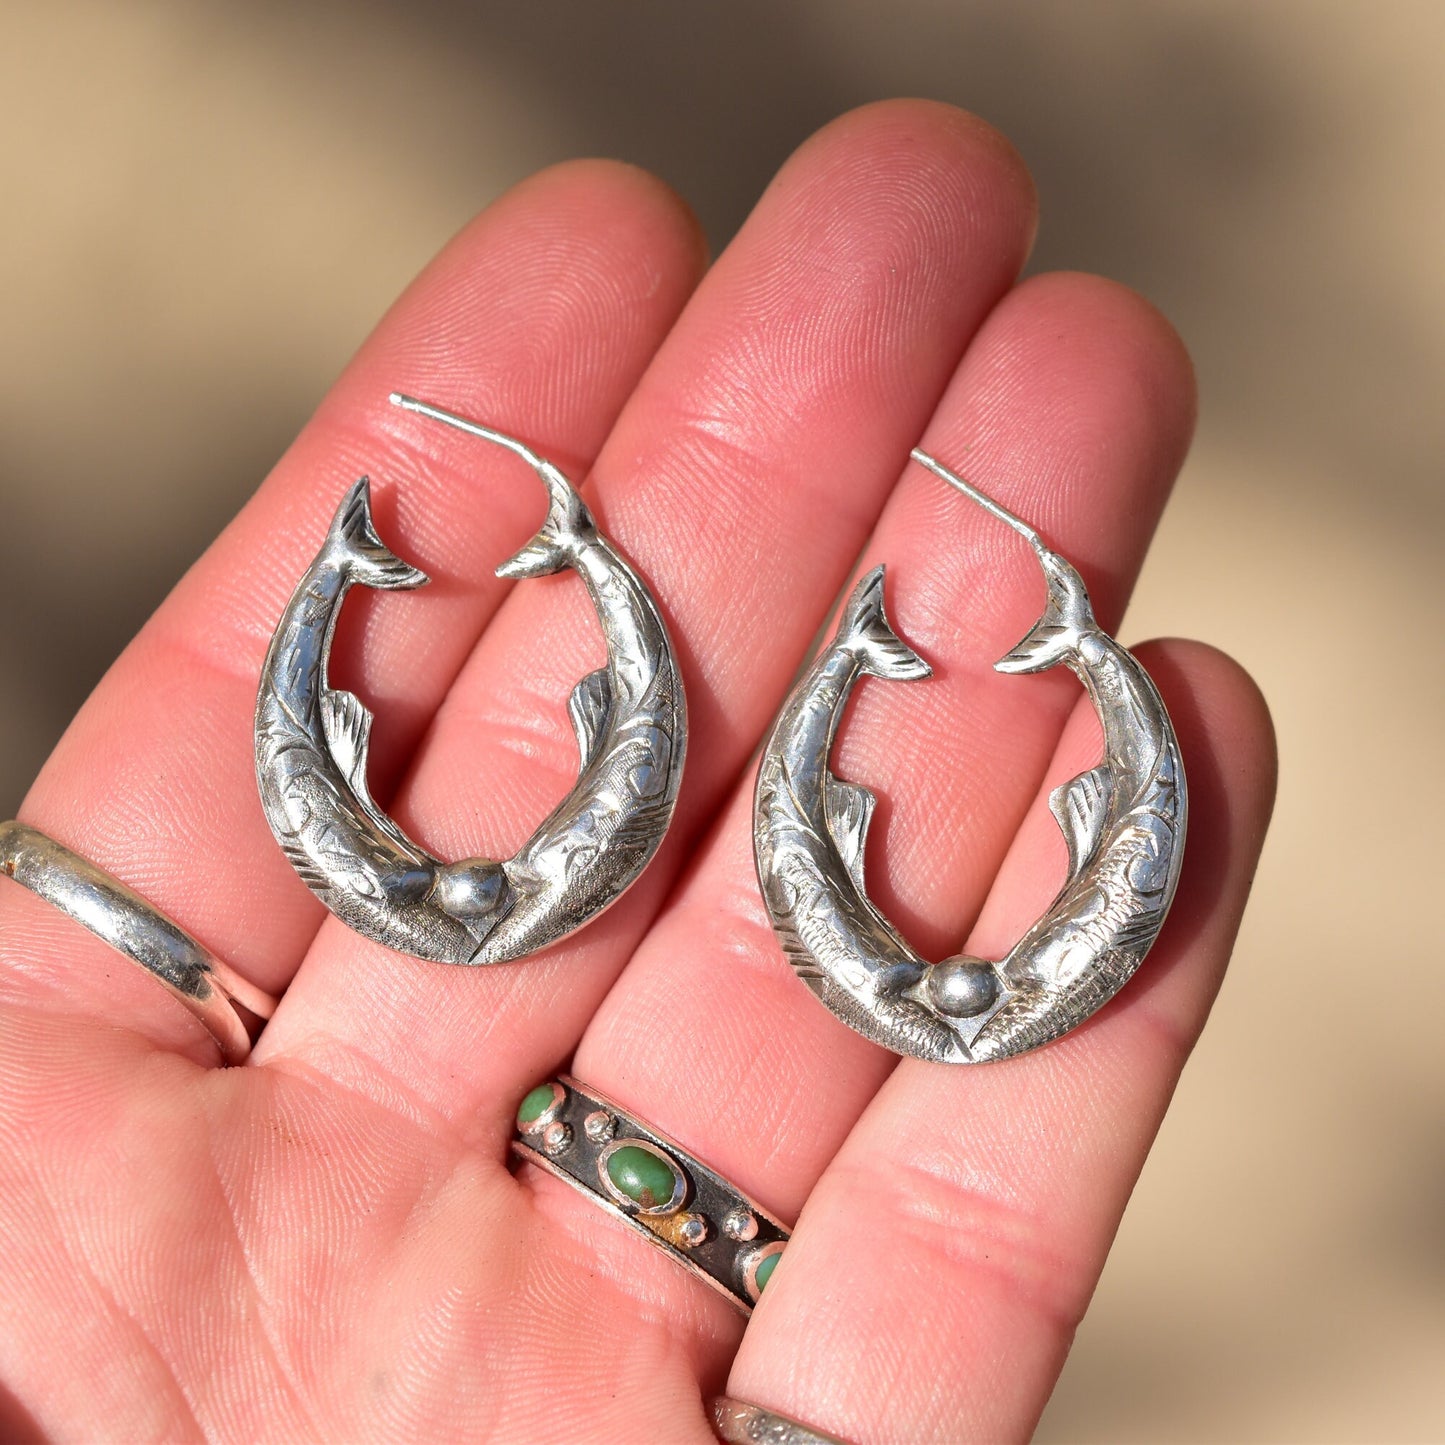 Engraved sterling silver fish hoop earrings in hand, showing mirrored etched fish design on oval pierced hoops measuring 30mm in diameter.